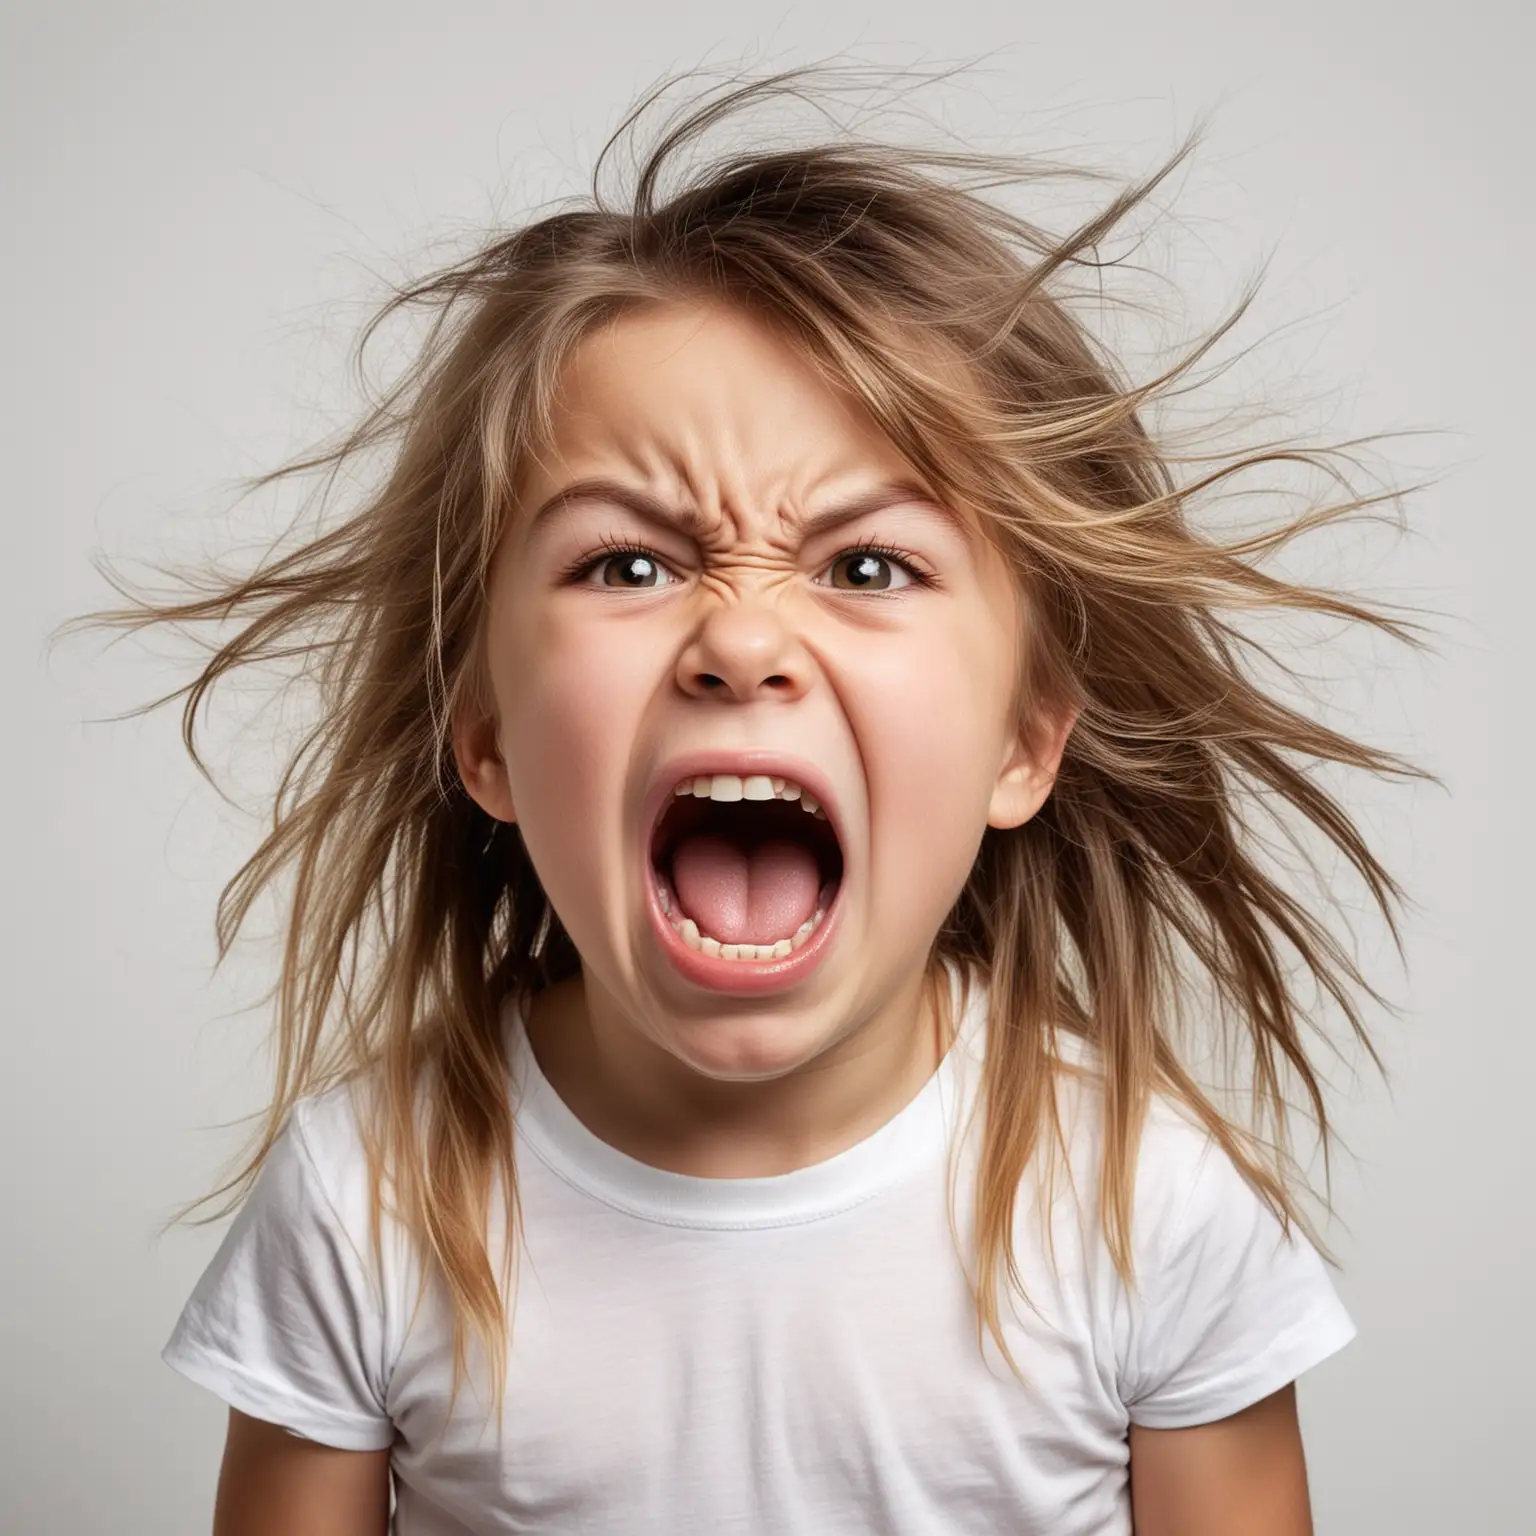 Angry Child with Unkempt Hair Screaming on White Background